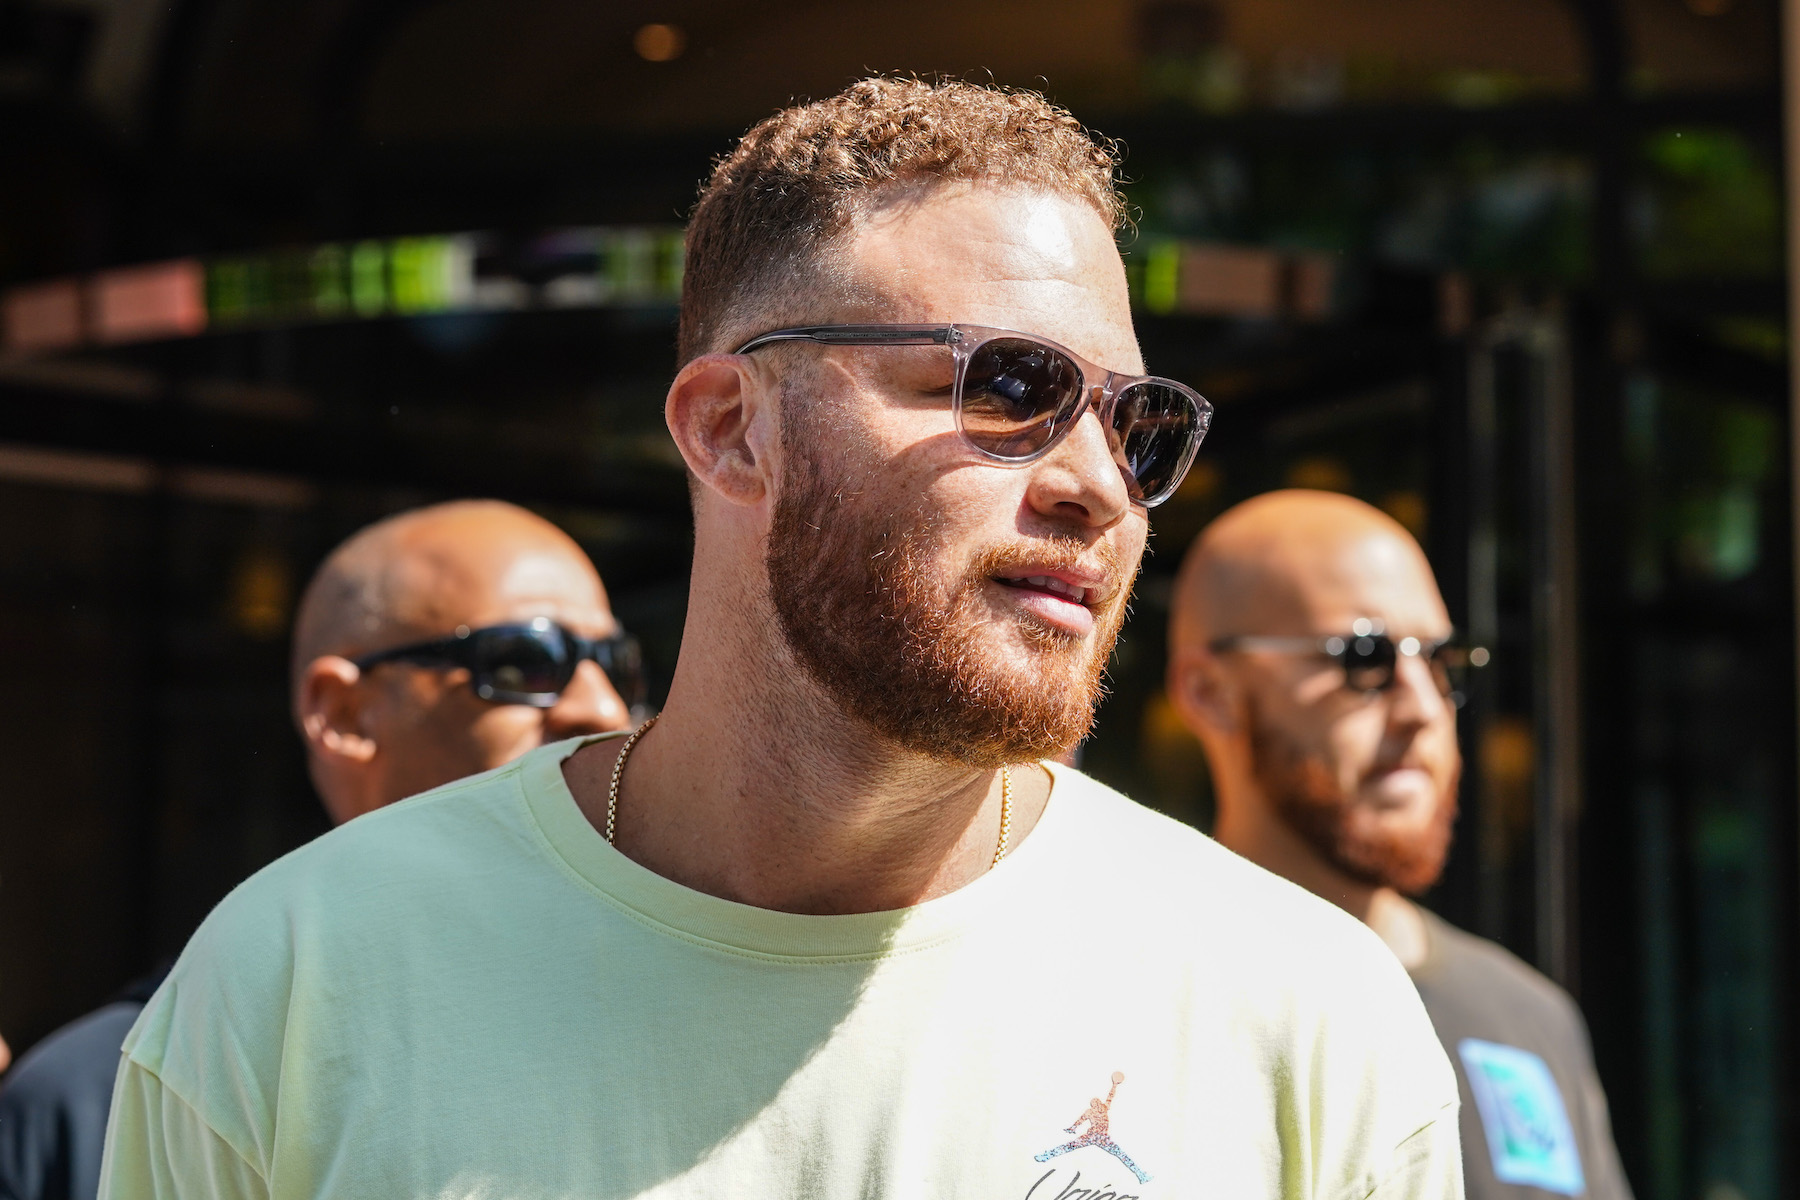 Blake Griffin Stopped Working With Sports Psychologists After This Awkward Encounter